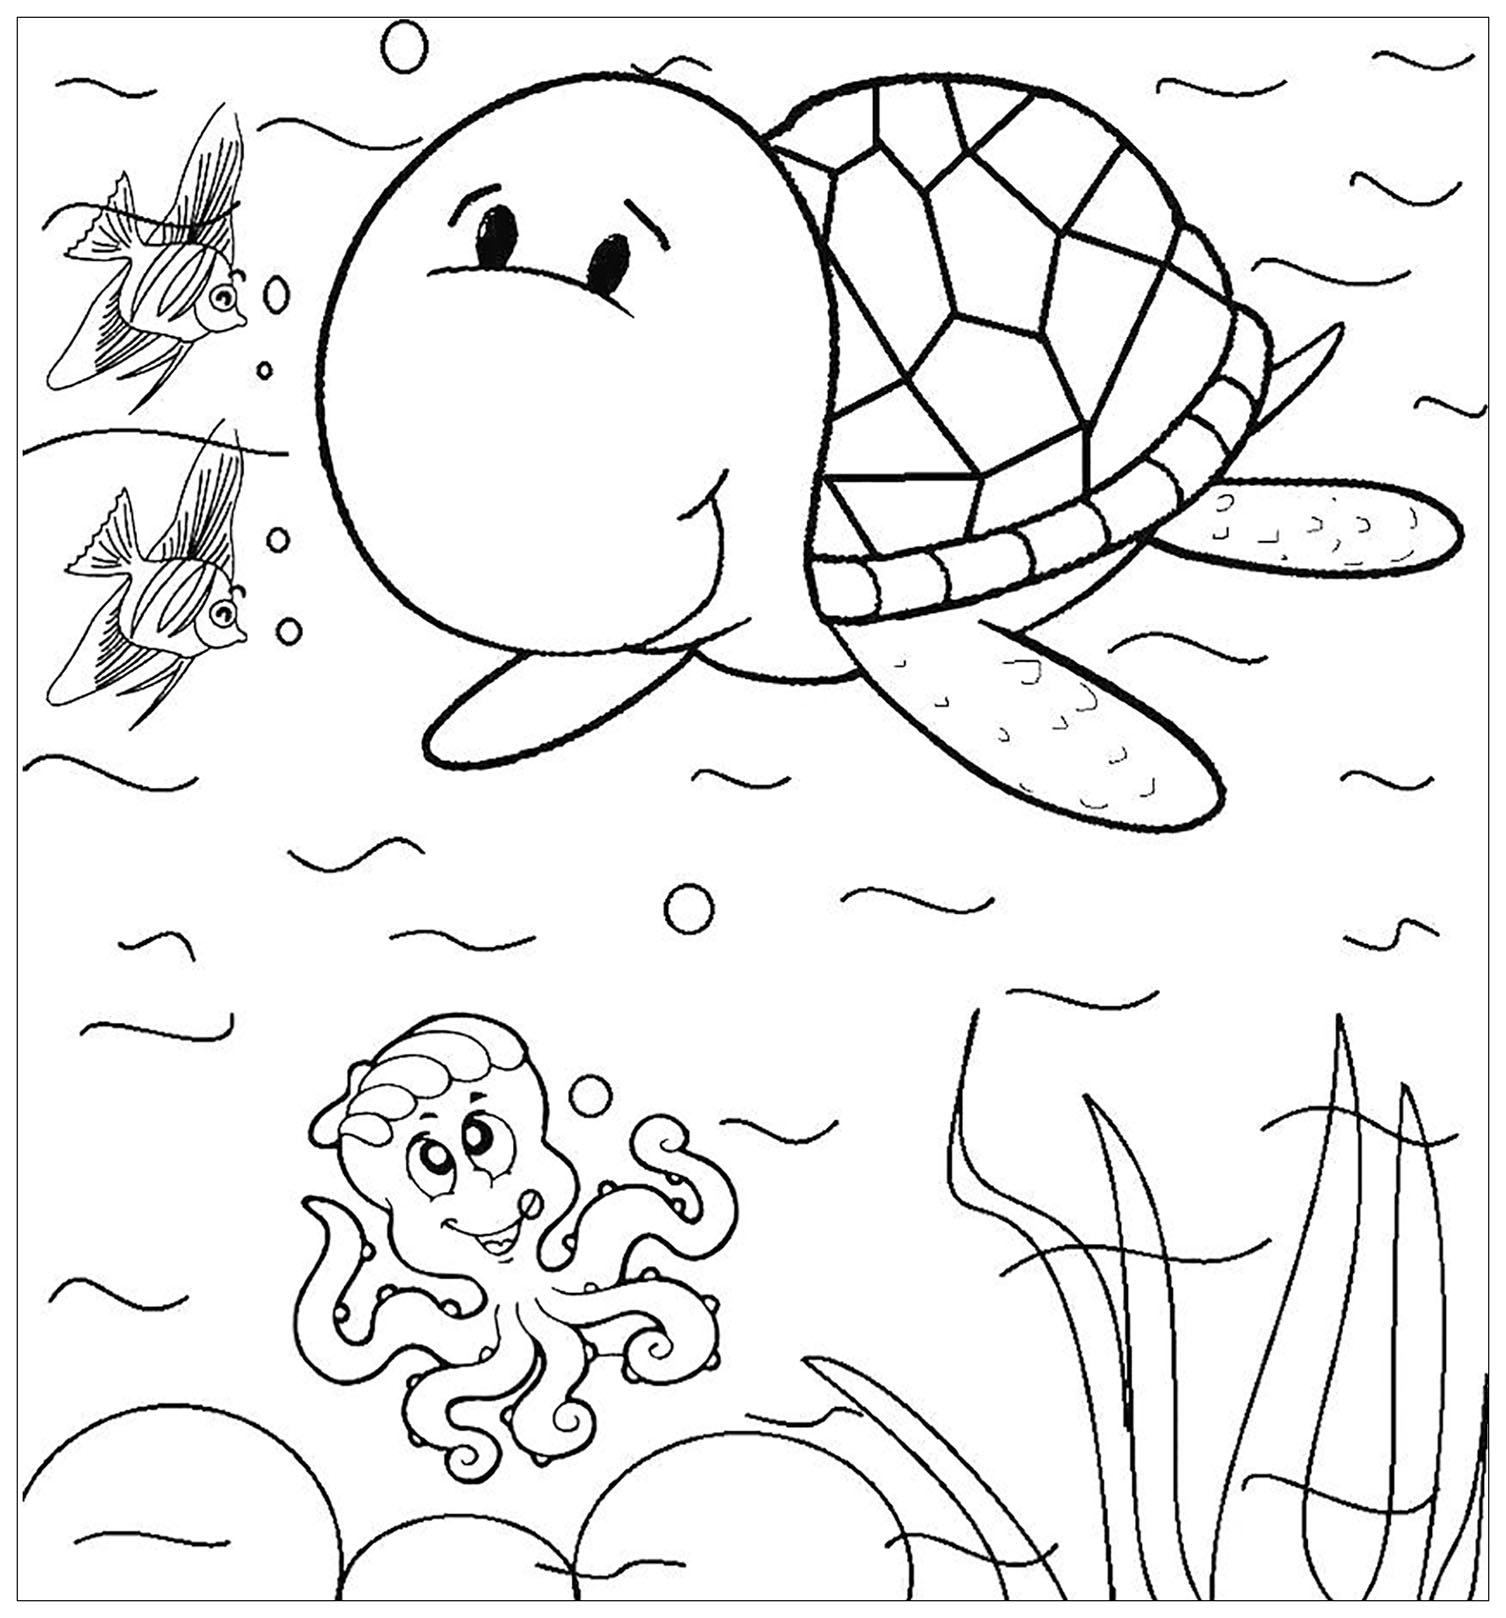 Easy coloring turtle image for kids